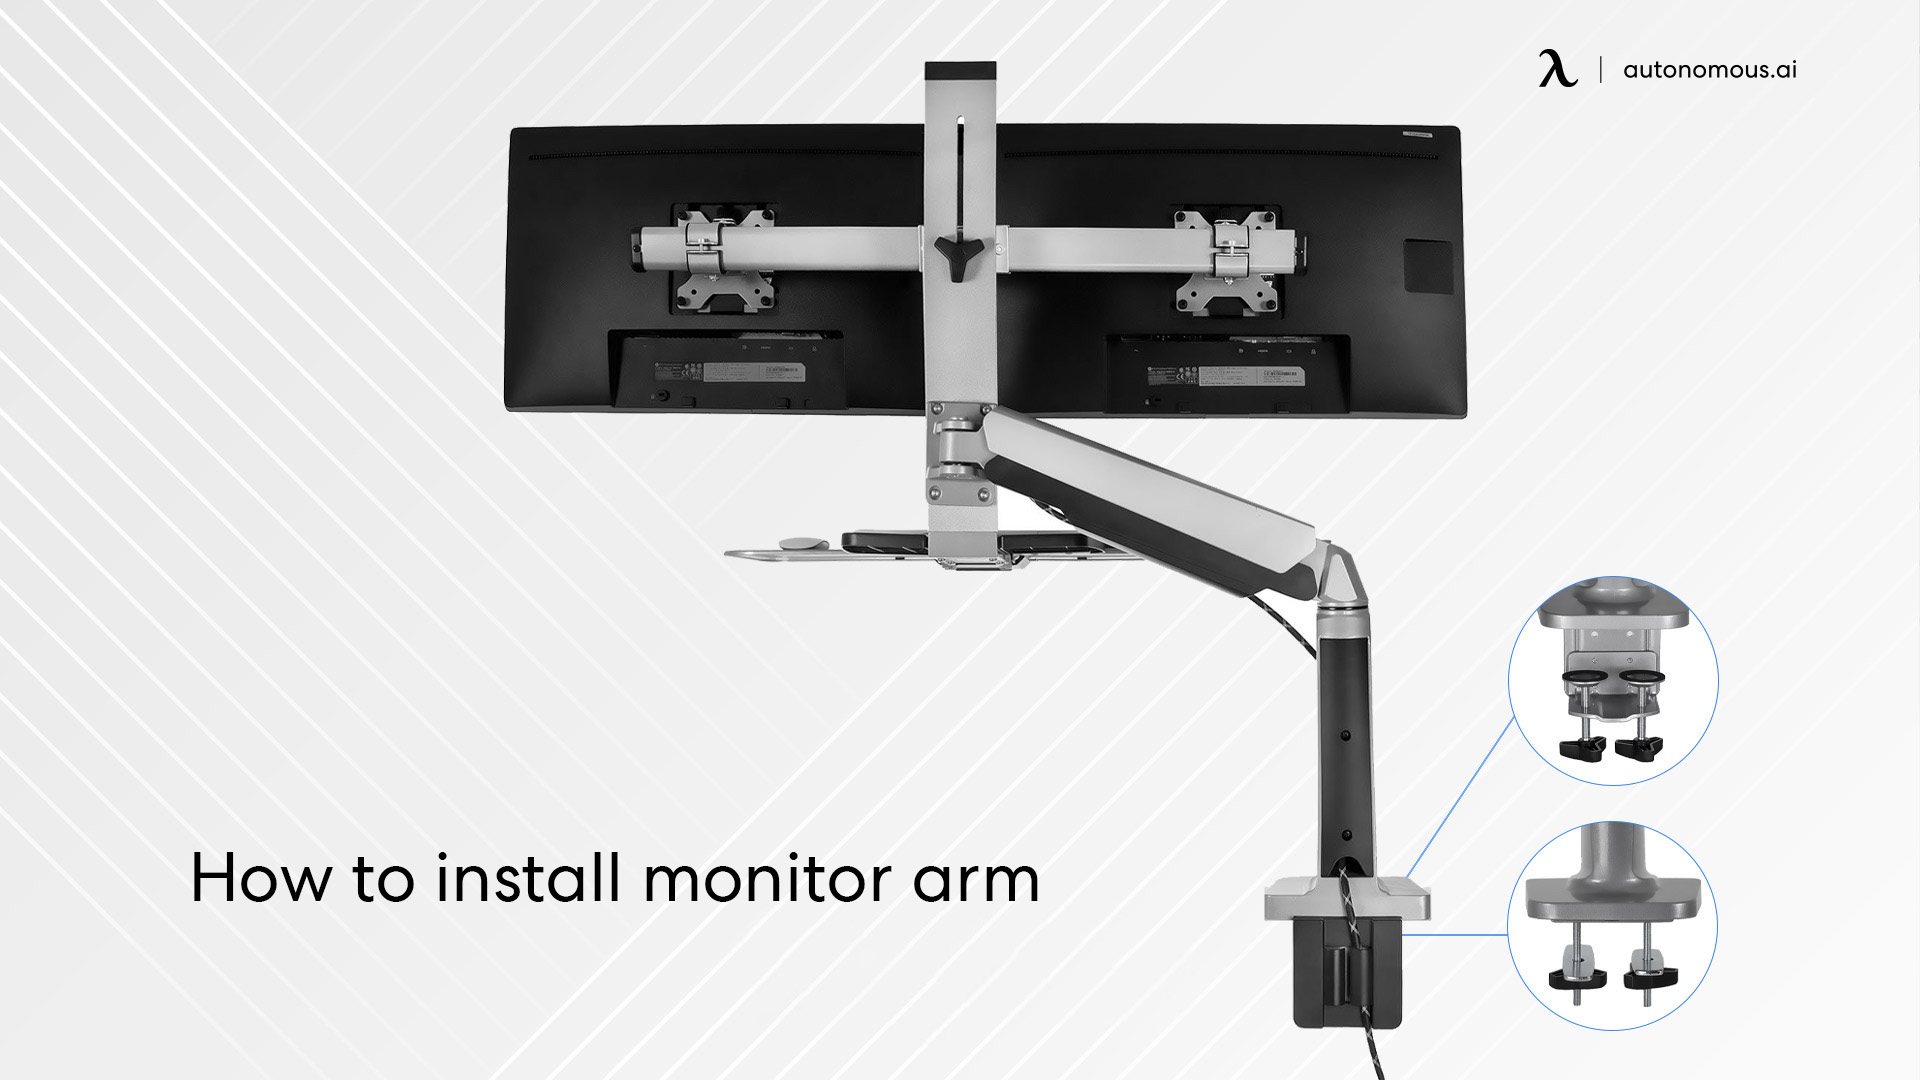 How to install monitor arm that has a clamp style